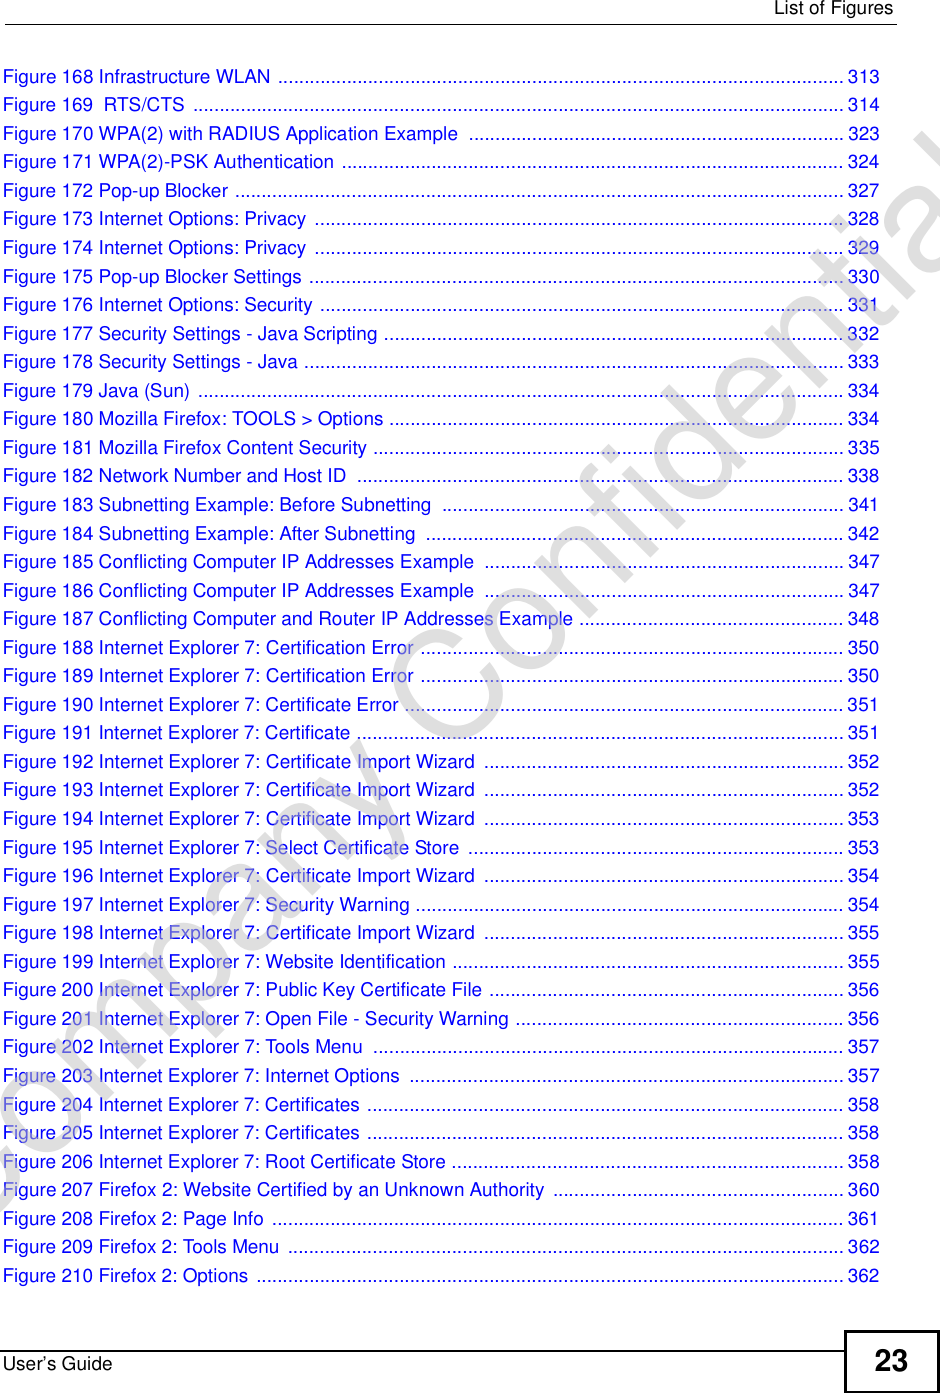  List of FiguresUser’s Guide 23Figure 168 Infrastructure WLAN ...........................................................................................................313Figure 169  RTS/CTS ...........................................................................................................................314Figure 170 WPA(2) with RADIUS Application Example .......................................................................323Figure 171 WPA(2)-PSK Authentication ...............................................................................................324Figure 172 Pop-up Blocker ...................................................................................................................327Figure 173 Internet Options: Privacy ....................................................................................................328Figure 174 Internet Options: Privacy ....................................................................................................329Figure 175 Pop-up Blocker Settings .....................................................................................................330Figure 176 Internet Options: Security ...................................................................................................331Figure 177 Security Settings - Java Scripting .......................................................................................332Figure 178 Security Settings - Java ......................................................................................................333Figure 179 Java (Sun) ..........................................................................................................................334Figure 180 Mozilla Firefox: TOOLS &gt; Options ......................................................................................334Figure 181 Mozilla Firefox Content Security .........................................................................................335Figure 182 Network Number and Host ID ............................................................................................338Figure 183 Subnetting Example: Before Subnetting ............................................................................341Figure 184 Subnetting Example: After Subnetting ...............................................................................342Figure 185 Conflicting Computer IP Addresses Example ....................................................................347Figure 186 Conflicting Computer IP Addresses Example ....................................................................347Figure 187 Conflicting Computer and Router IP Addresses Example ..................................................348Figure 188 Internet Explorer 7: Certification Error ................................................................................350Figure 189 Internet Explorer 7: Certification Error ................................................................................350Figure 190 Internet Explorer 7: Certificate Error ...................................................................................351Figure 191 Internet Explorer 7: Certificate ............................................................................................351Figure 192 Internet Explorer 7: Certificate Import Wizard ....................................................................352Figure 193 Internet Explorer 7: Certificate Import Wizard ....................................................................352Figure 194 Internet Explorer 7: Certificate Import Wizard ....................................................................353Figure 195 Internet Explorer 7: Select Certificate Store .......................................................................353Figure 196 Internet Explorer 7: Certificate Import Wizard ....................................................................354Figure 197 Internet Explorer 7: Security Warning .................................................................................354Figure 198 Internet Explorer 7: Certificate Import Wizard ....................................................................355Figure 199 Internet Explorer 7: Website Identification ..........................................................................355Figure 200 Internet Explorer 7: Public Key Certificate File ...................................................................356Figure 201 Internet Explorer 7: Open File - Security Warning ..............................................................356Figure 202 Internet Explorer 7: Tools Menu .........................................................................................357Figure 203 Internet Explorer 7: Internet Options ..................................................................................357Figure 204 Internet Explorer 7: Certificates ..........................................................................................358Figure 205 Internet Explorer 7: Certificates ..........................................................................................358Figure 206 Internet Explorer 7: Root Certificate Store ..........................................................................358Figure 207 Firefox 2: Website Certified by an Unknown Authority .......................................................360Figure 208 Firefox 2: Page Info ............................................................................................................361Figure 209 Firefox 2: Tools Menu .........................................................................................................362Figure 210 Firefox 2: Options ...............................................................................................................362Company Confidential